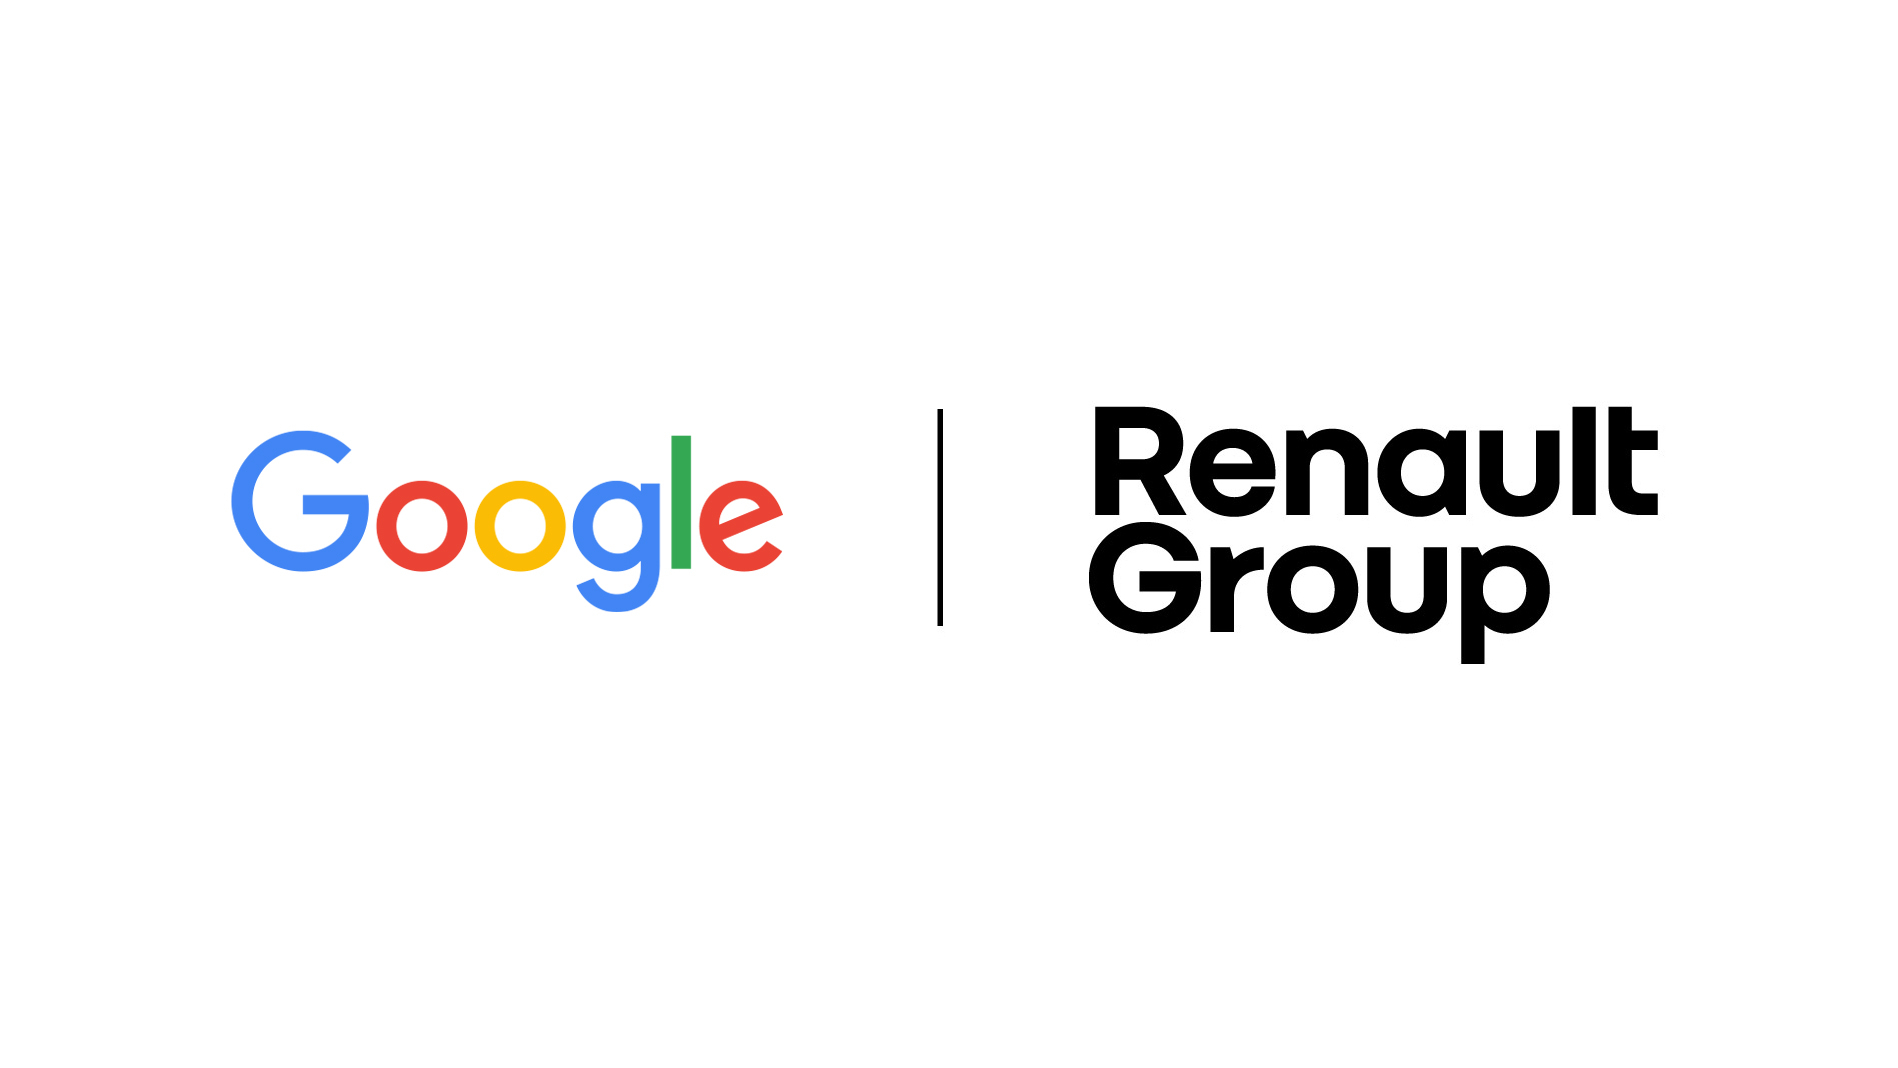 Google and Renault Group's respective logos together.